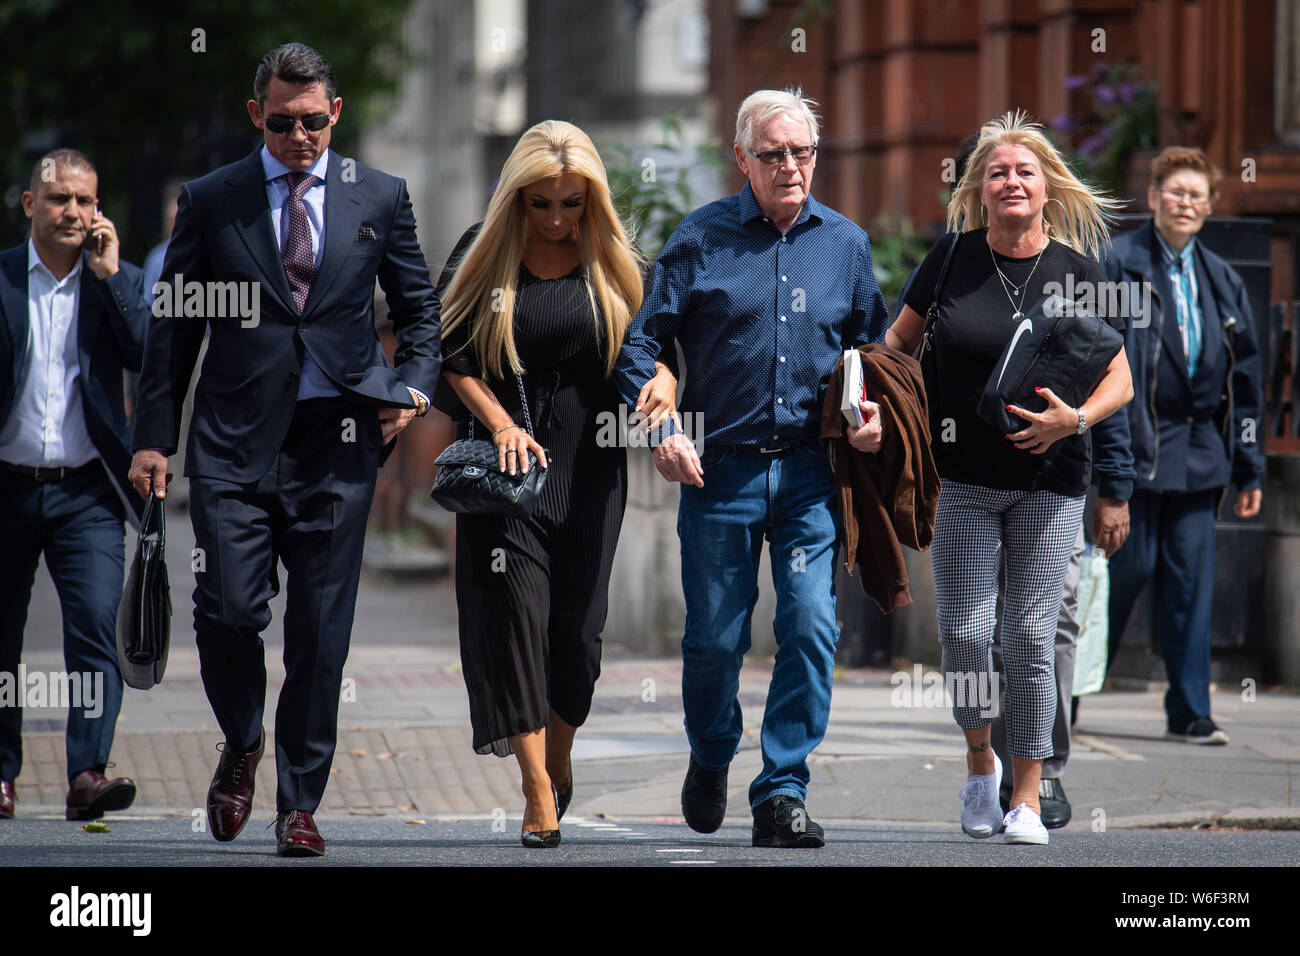 John 'Kenny' Collins (second right), ringleader of the Hatton Garden heist, arrives at Westminster Magistrates' Court, London, where he is set to hear if he will be sent back to jail for failing to pay back millions of pounds stolen in the raid. Stock Photo